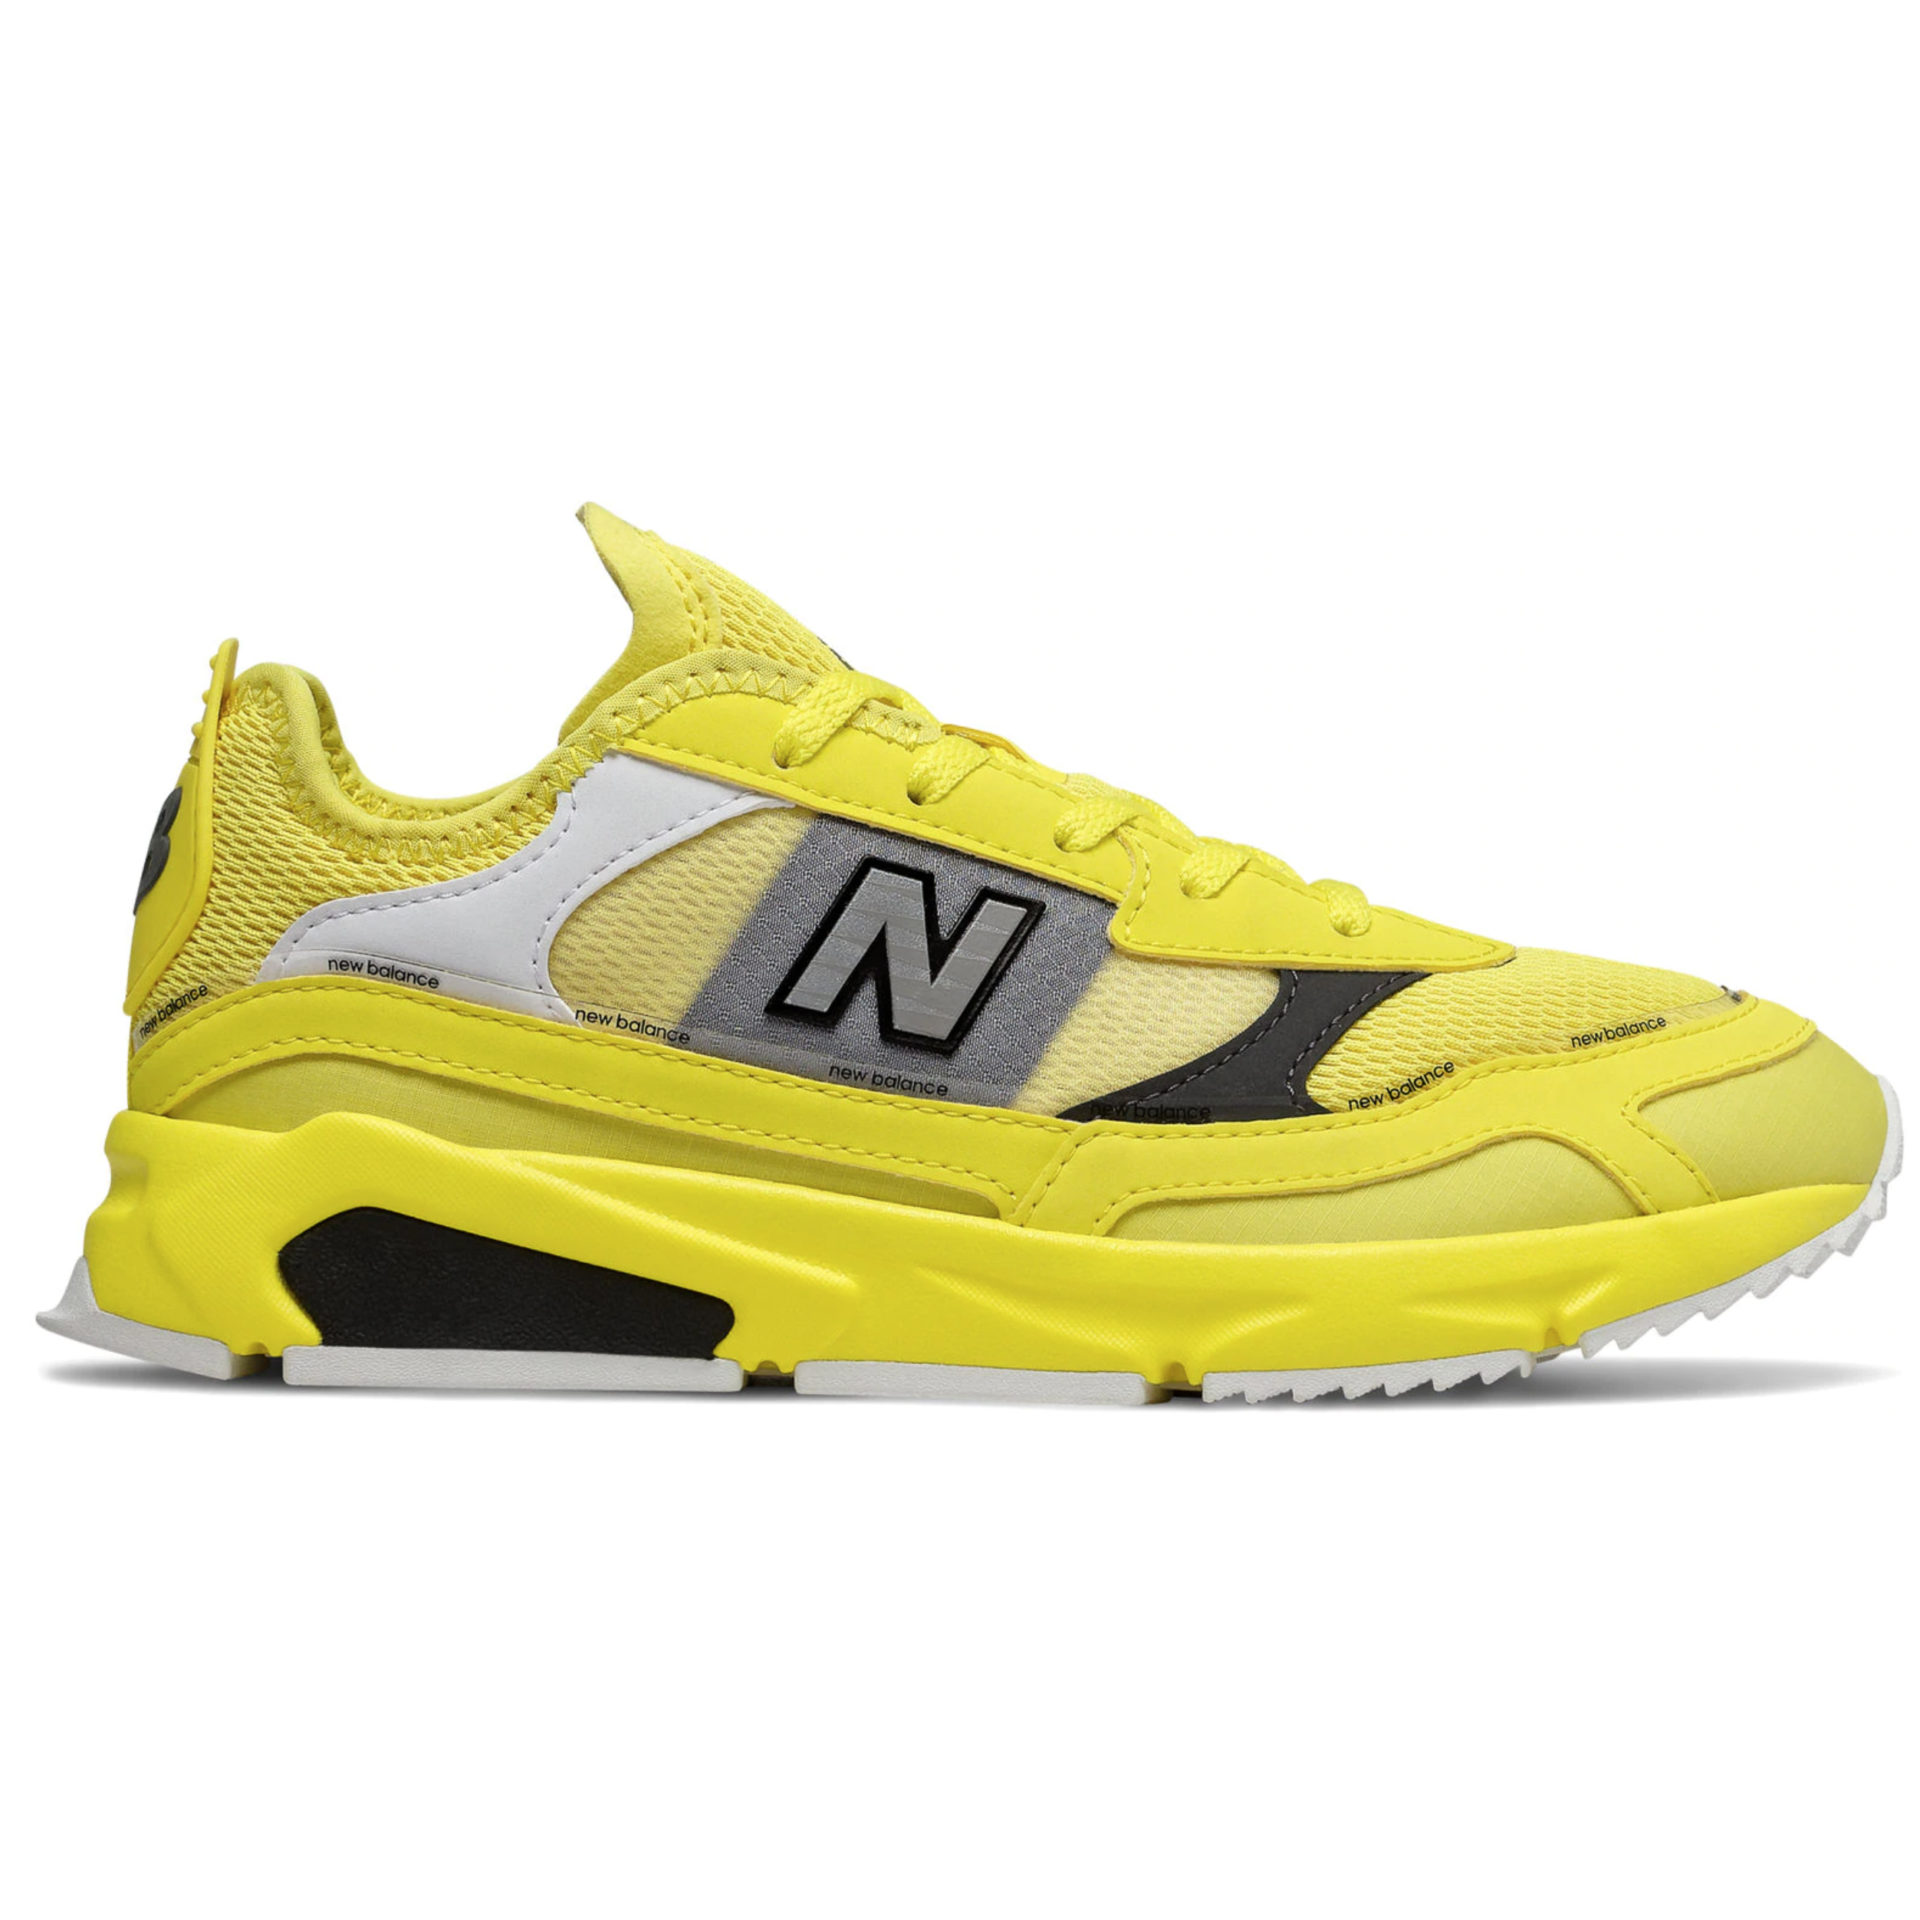 new balance outlet yellow wedges - 51 